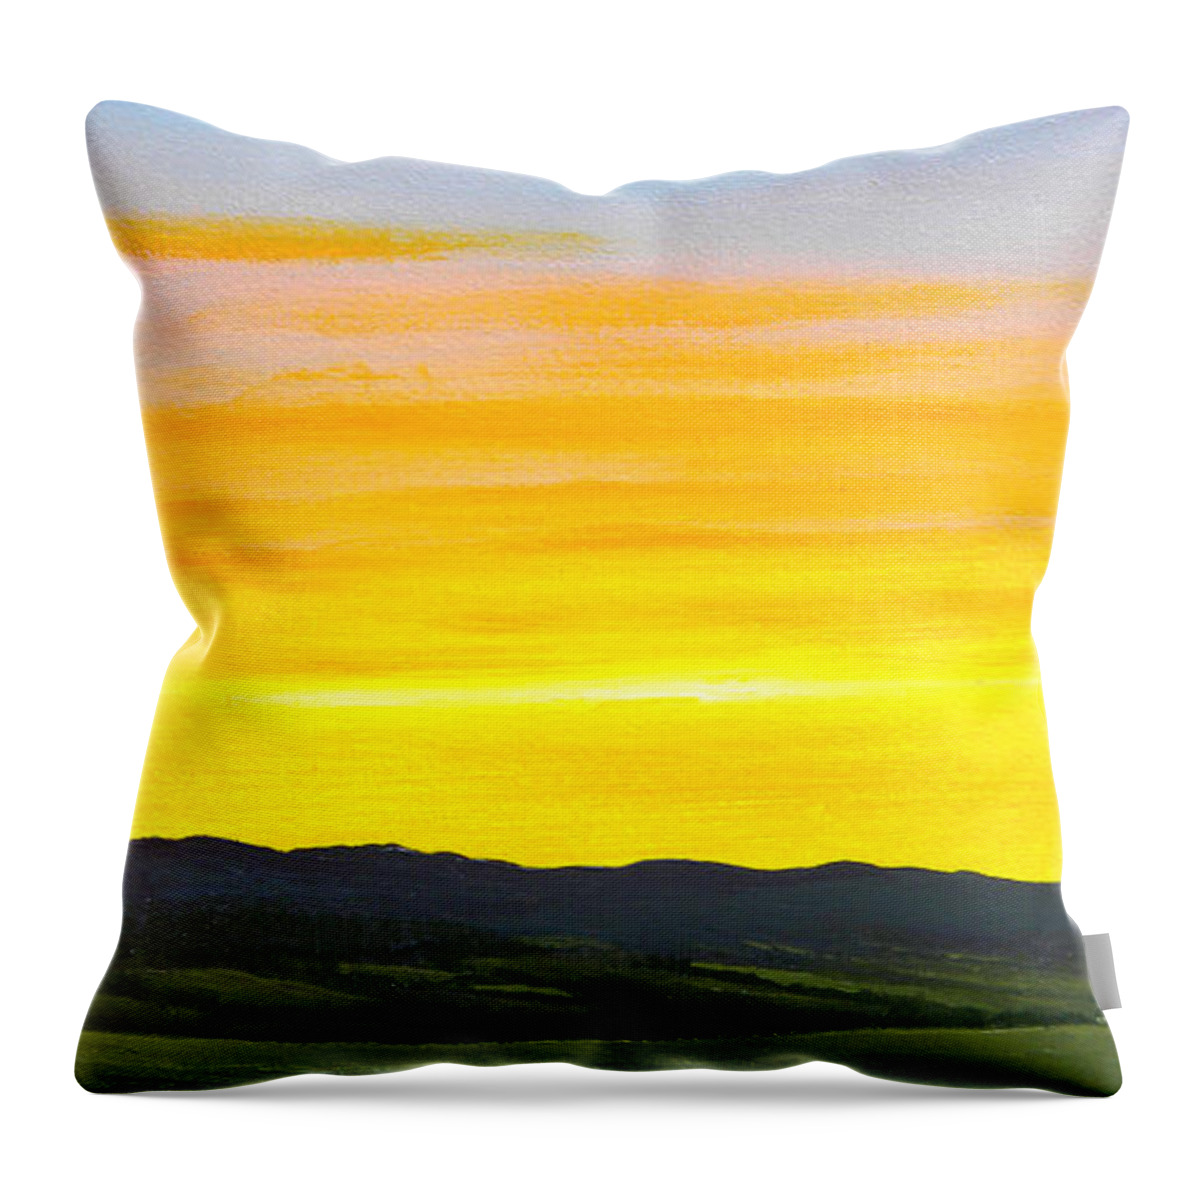 Sunrise Throw Pillow featuring the painting Sunrise by Frank Wilson